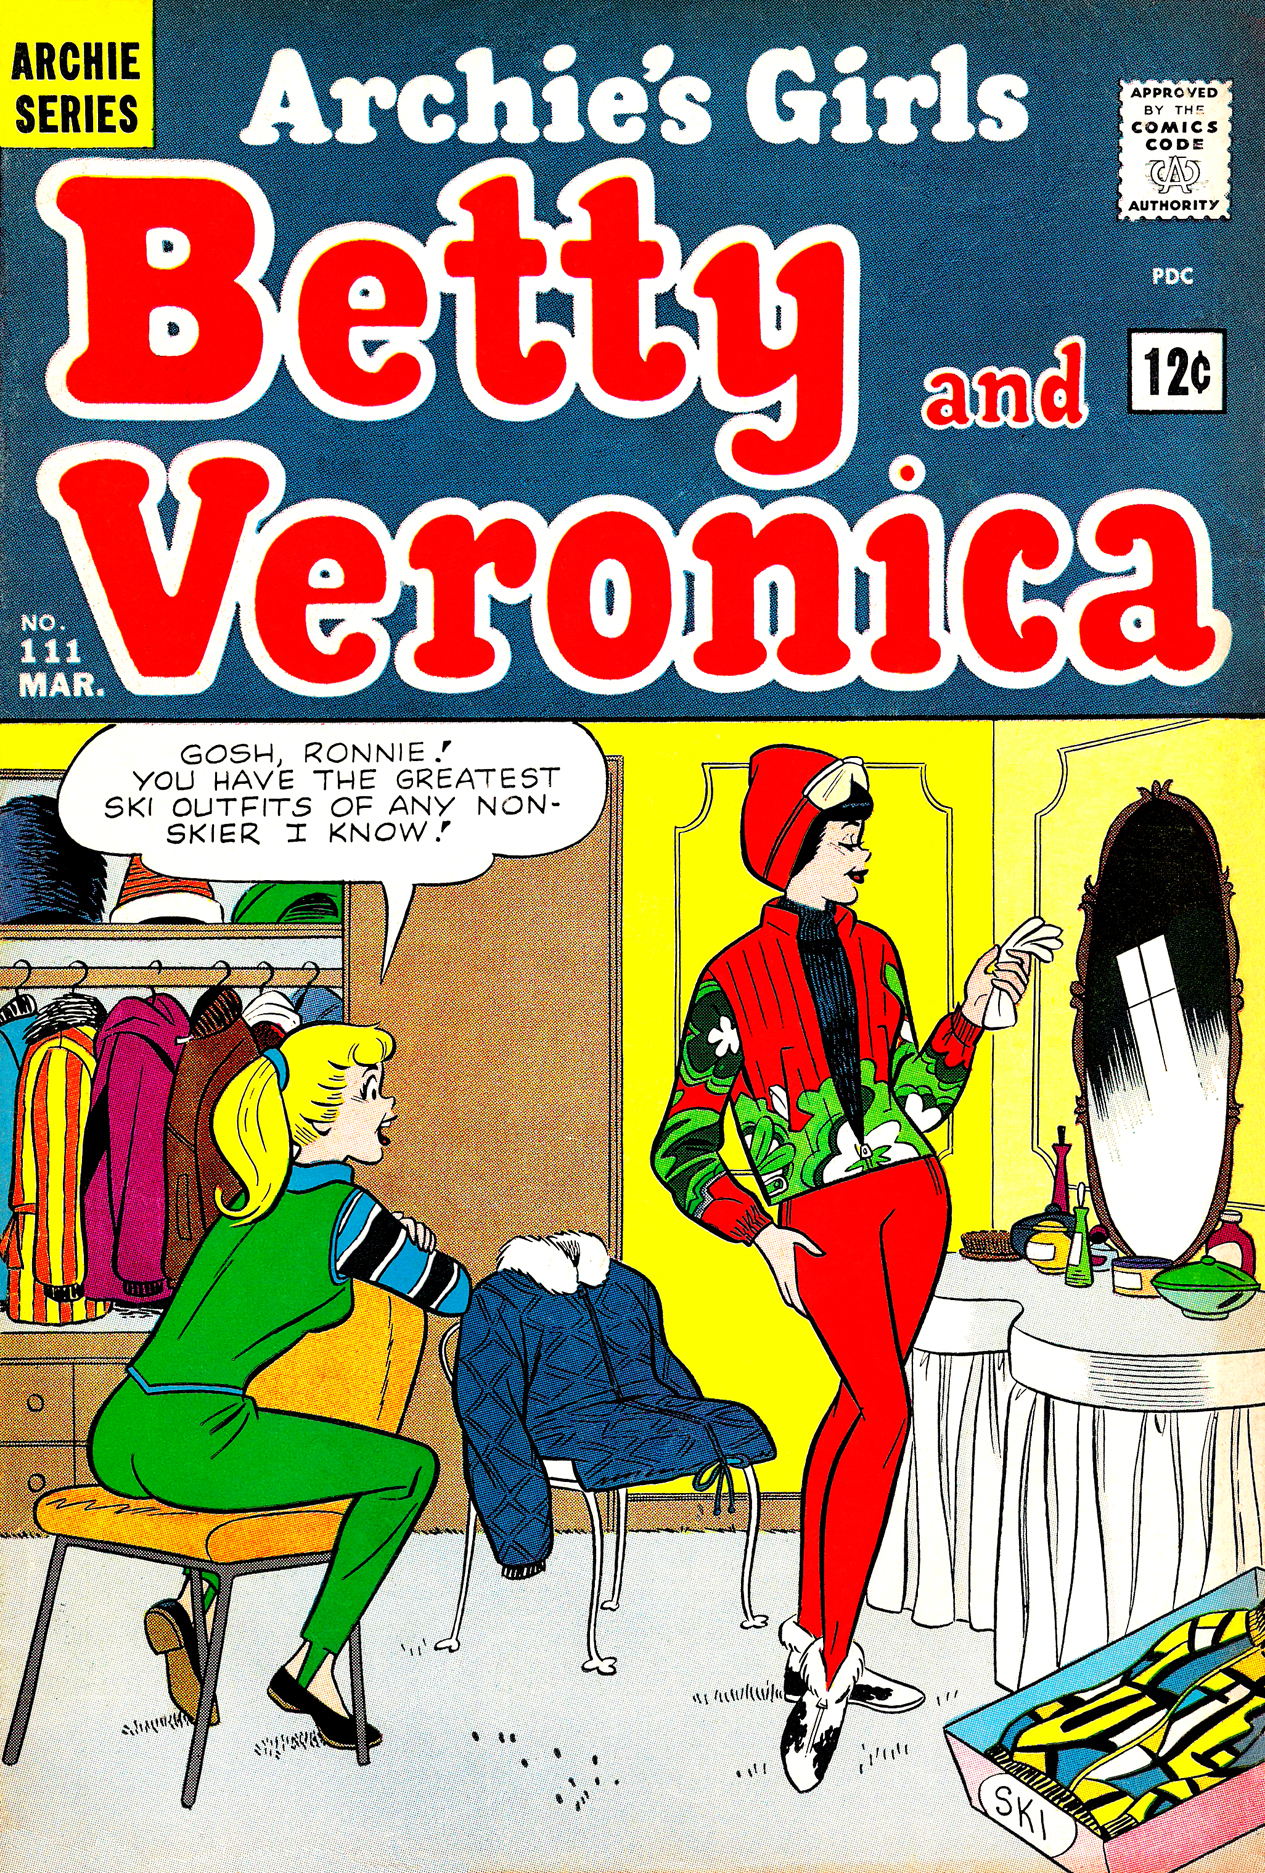 Read online Archie's Girls Betty and Veronica comic -  Issue #111 - 1